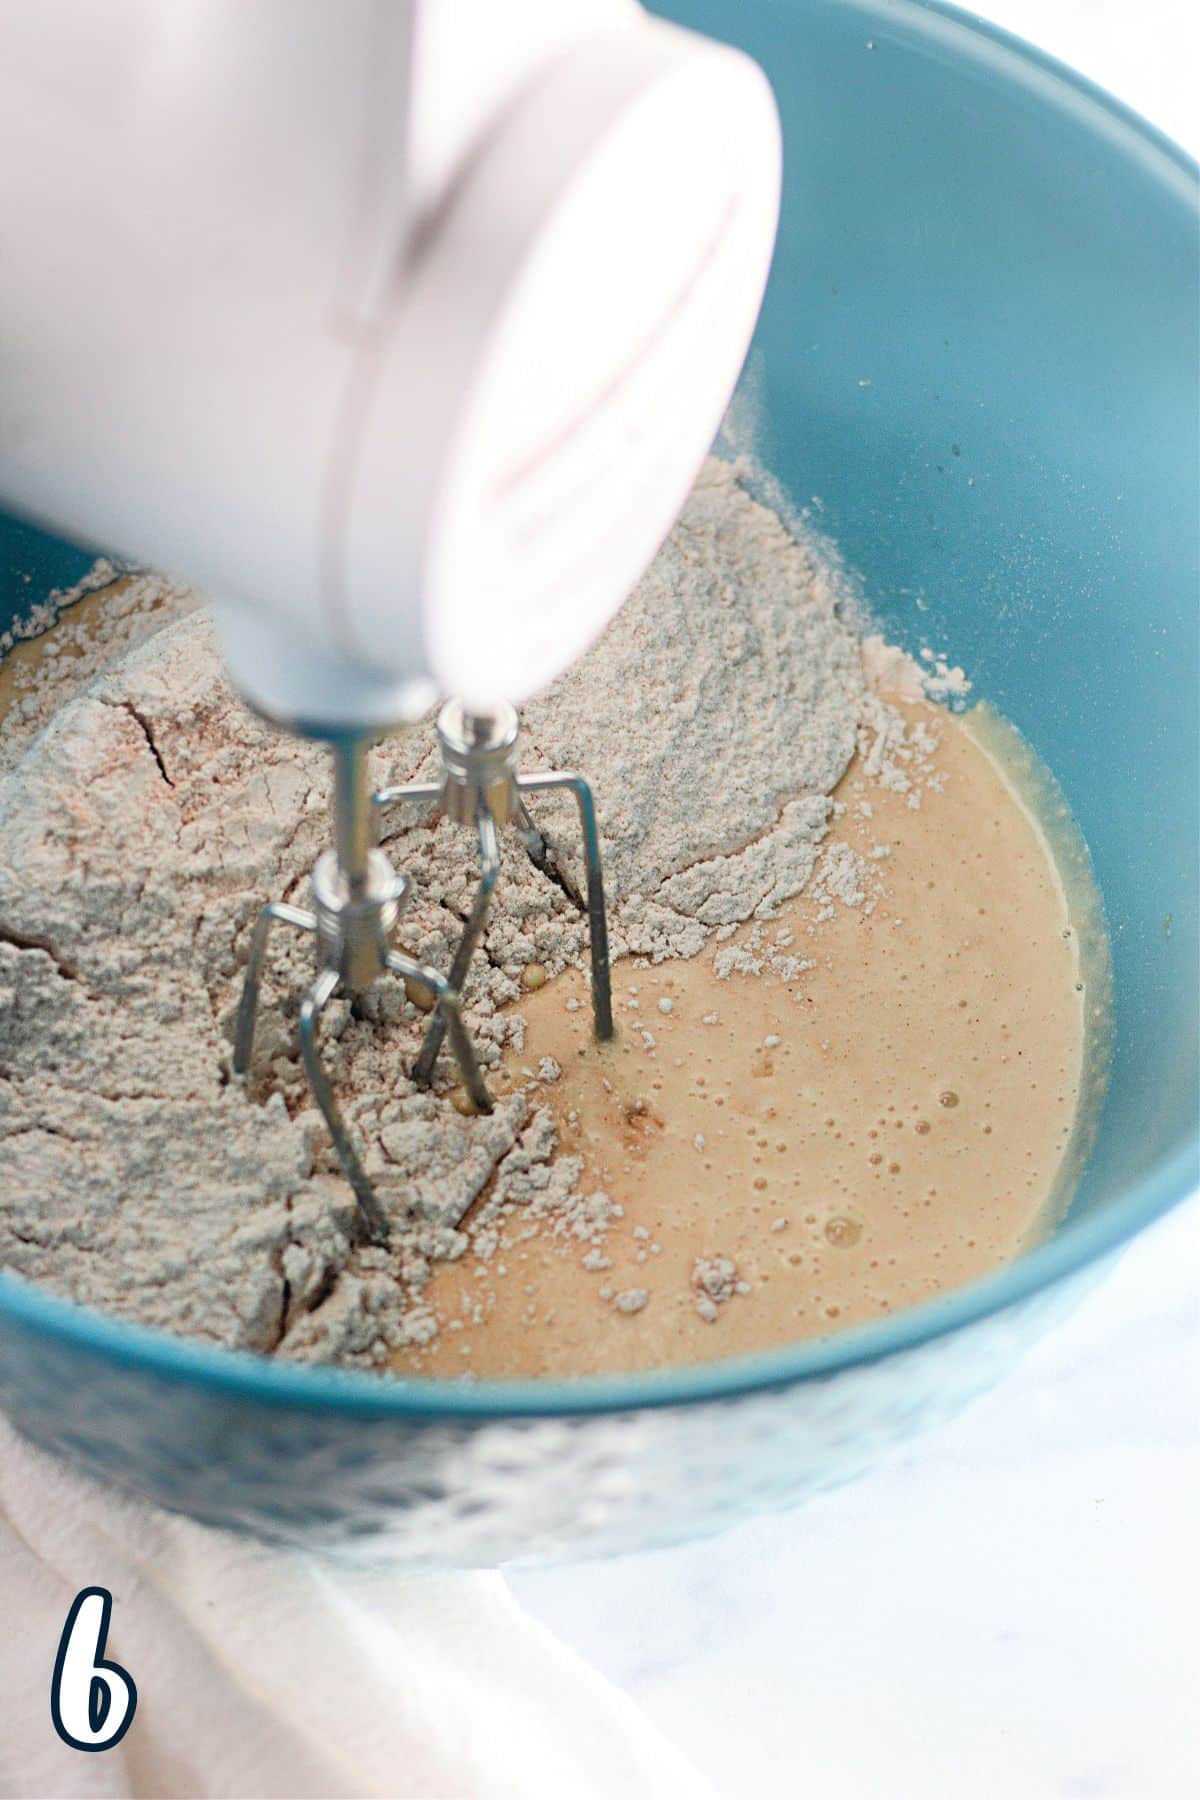 A mixer is mixing flour in a bowl to prepare Apple Cinnamon Muffins.